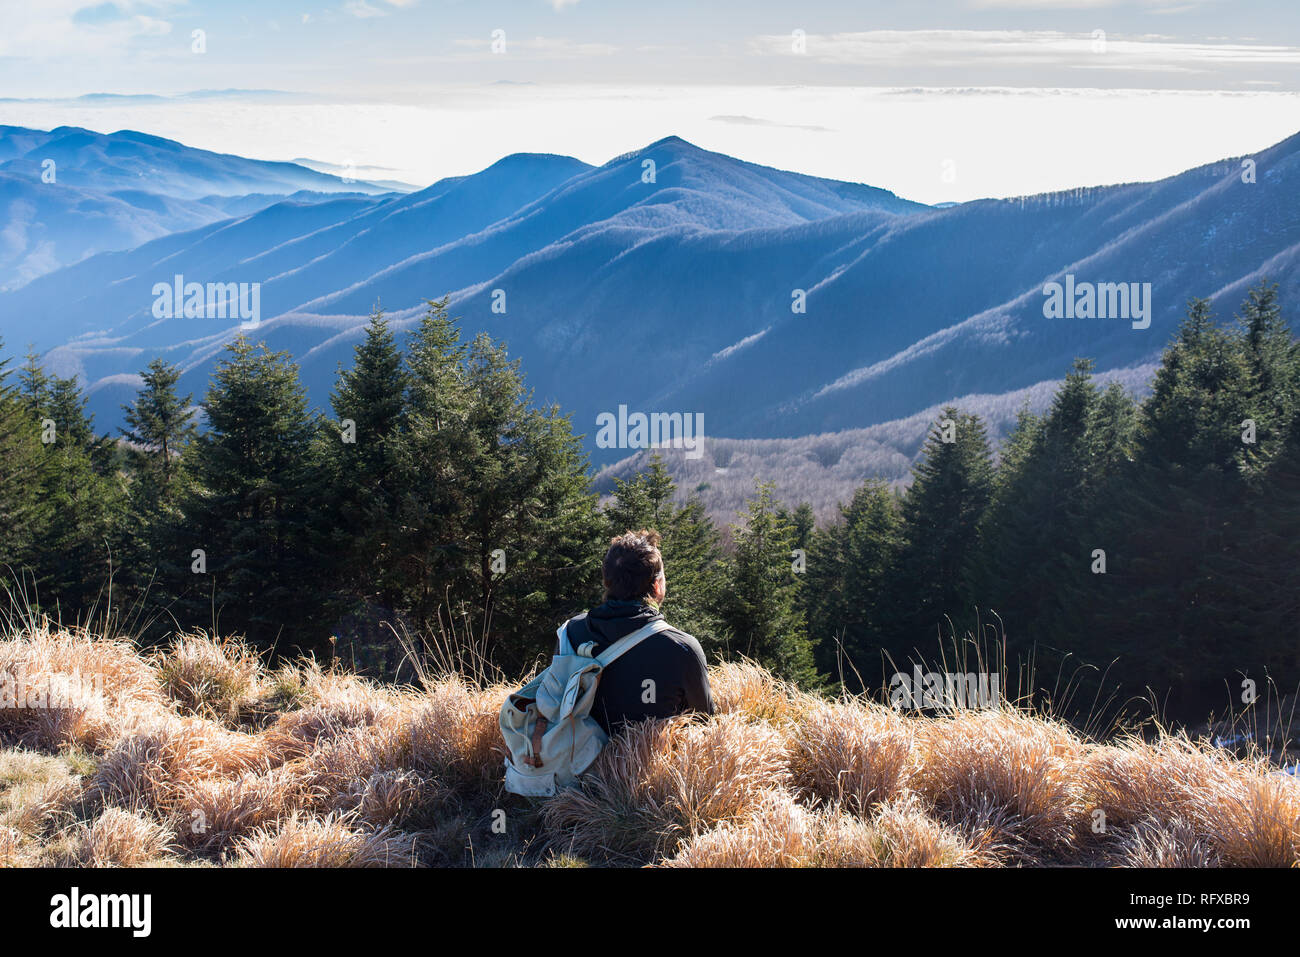 One man hiker wearing vintage rucksack sitting alone admiring the mountain landscape in winter. Stock Photo